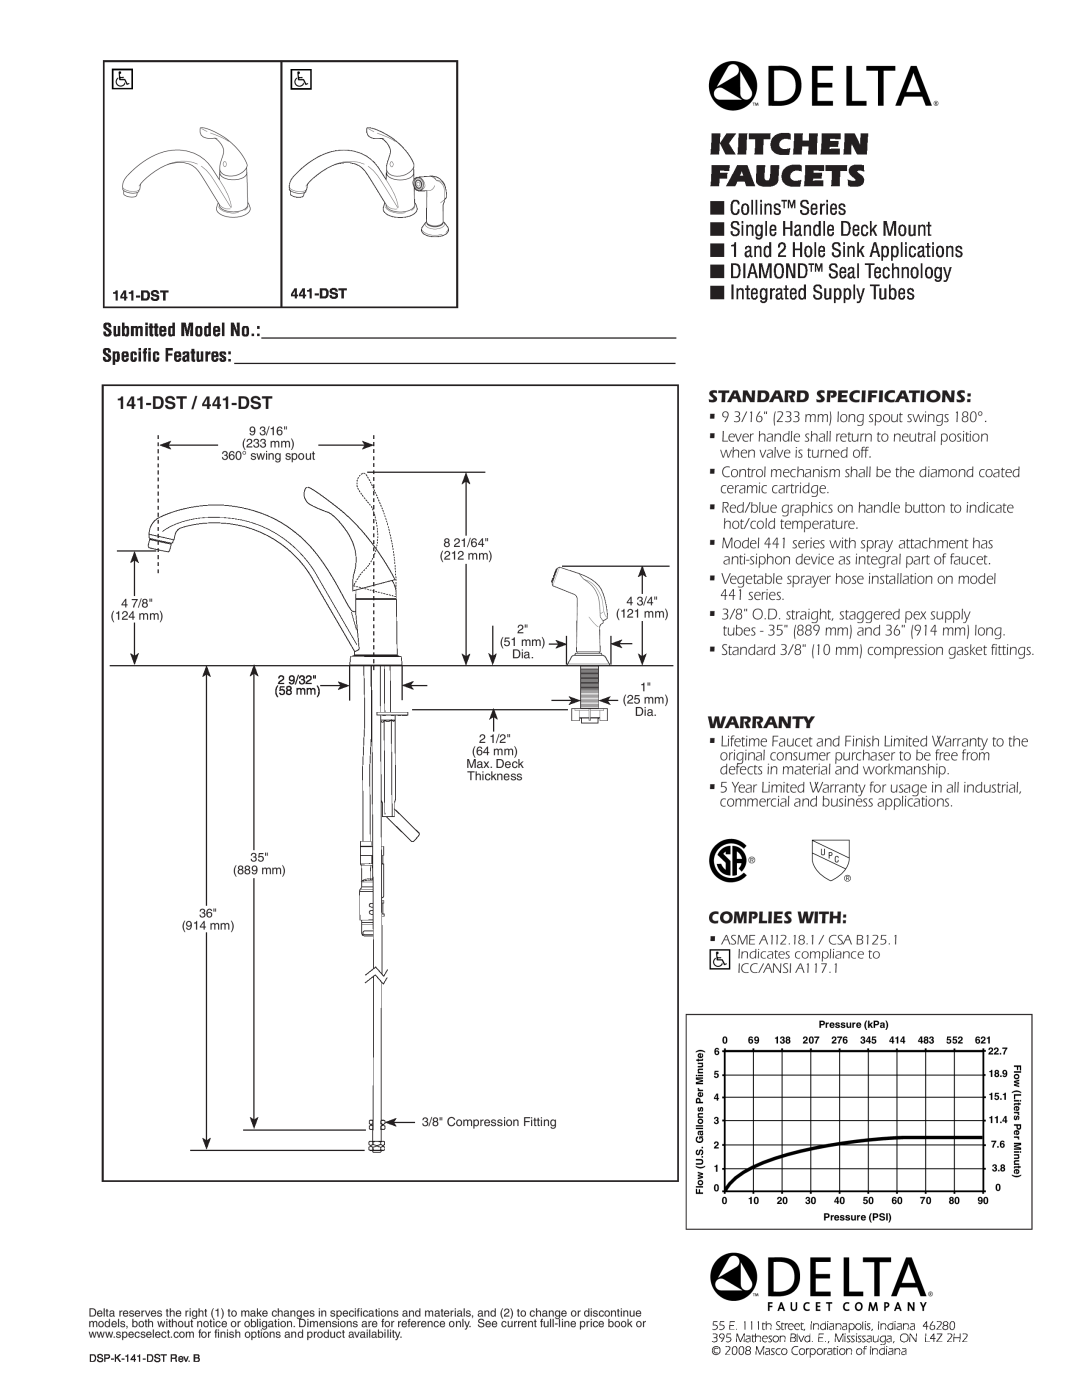 Delta 141-DST specifications Kitchen Faucets, Collins Series Single Handle Deck Mount, Integrated Supply Tubes, Warranty­ 